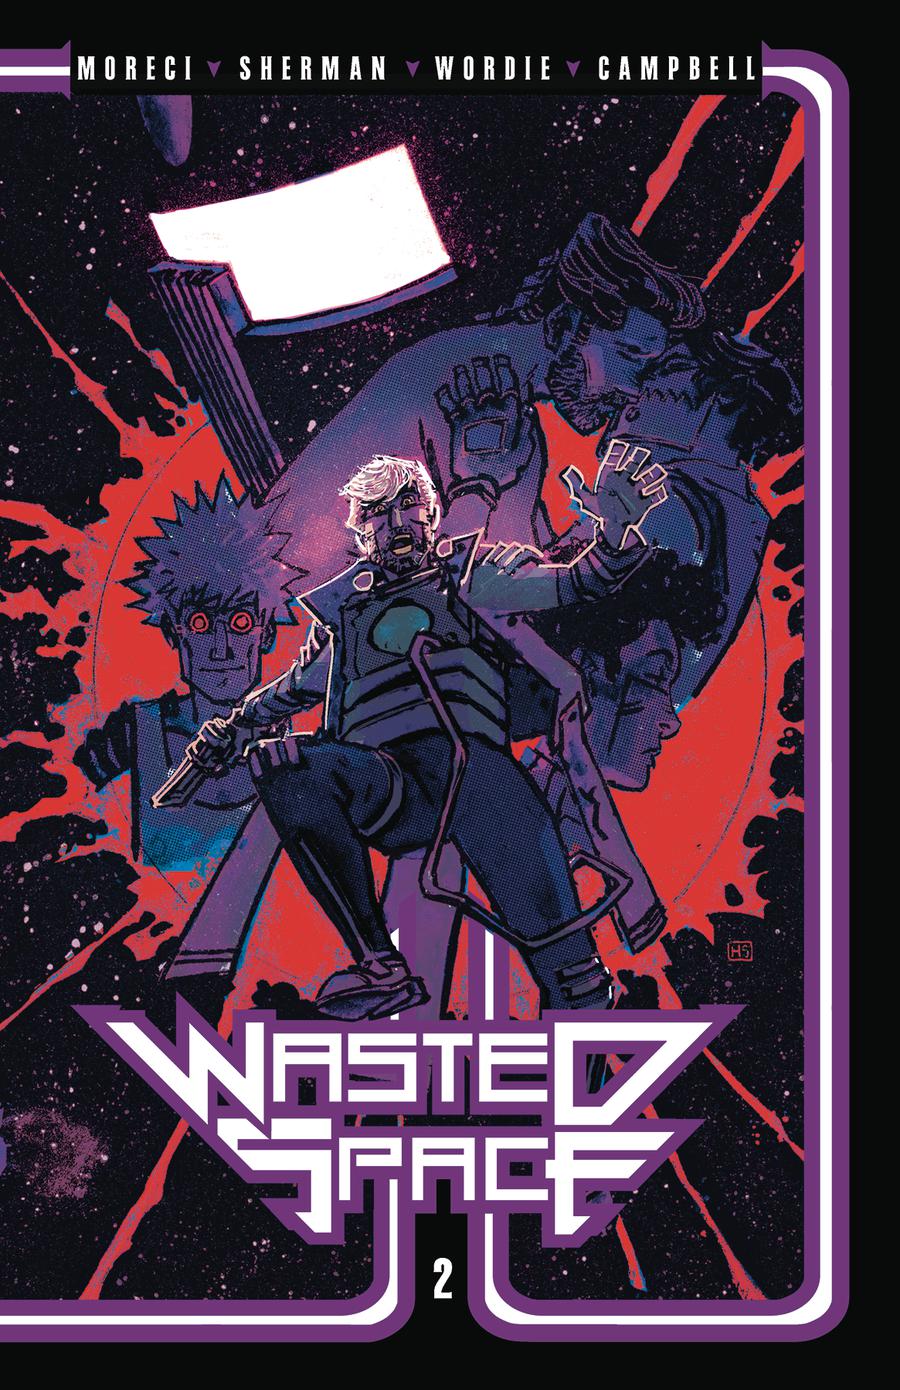 Wasted Space Vol 2 TP